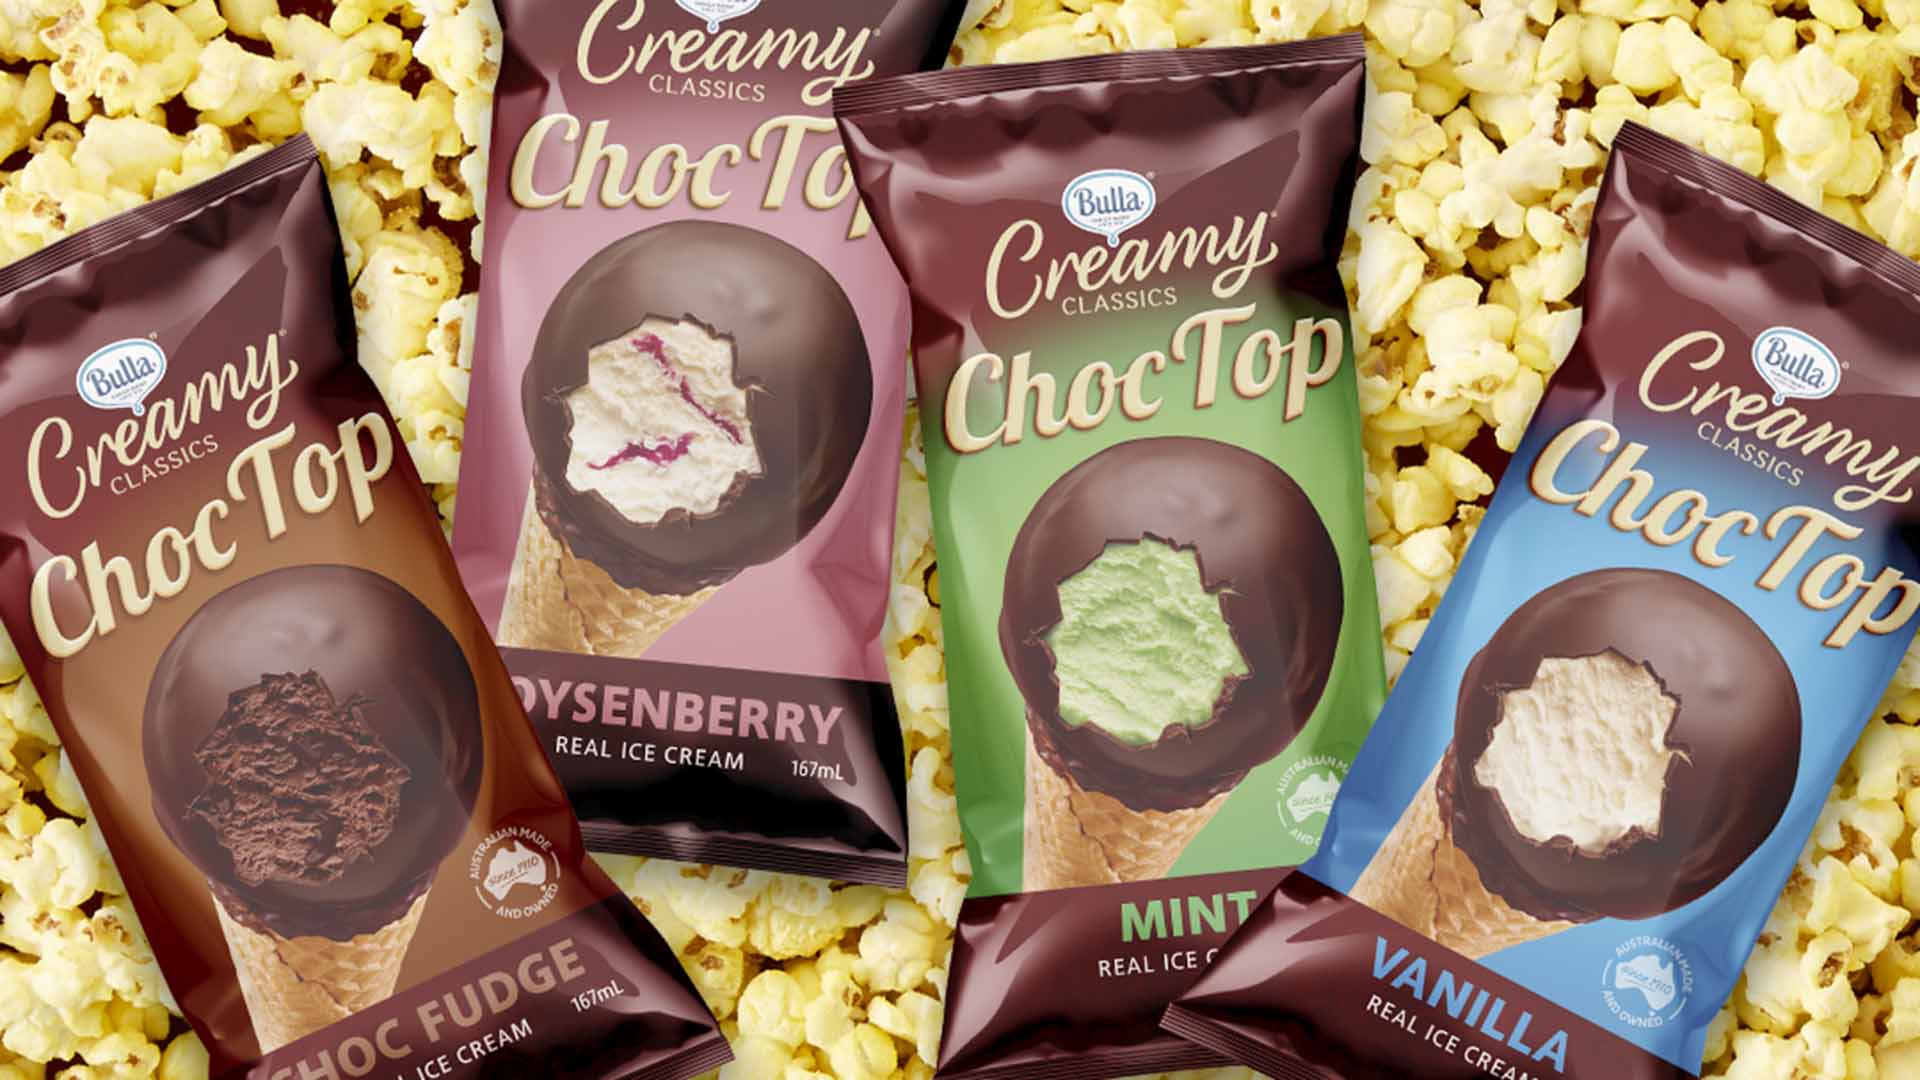 Bulla's Cinema Choc Tops Have Landed Back in Victorian Freezer Aisles for a Limited Time